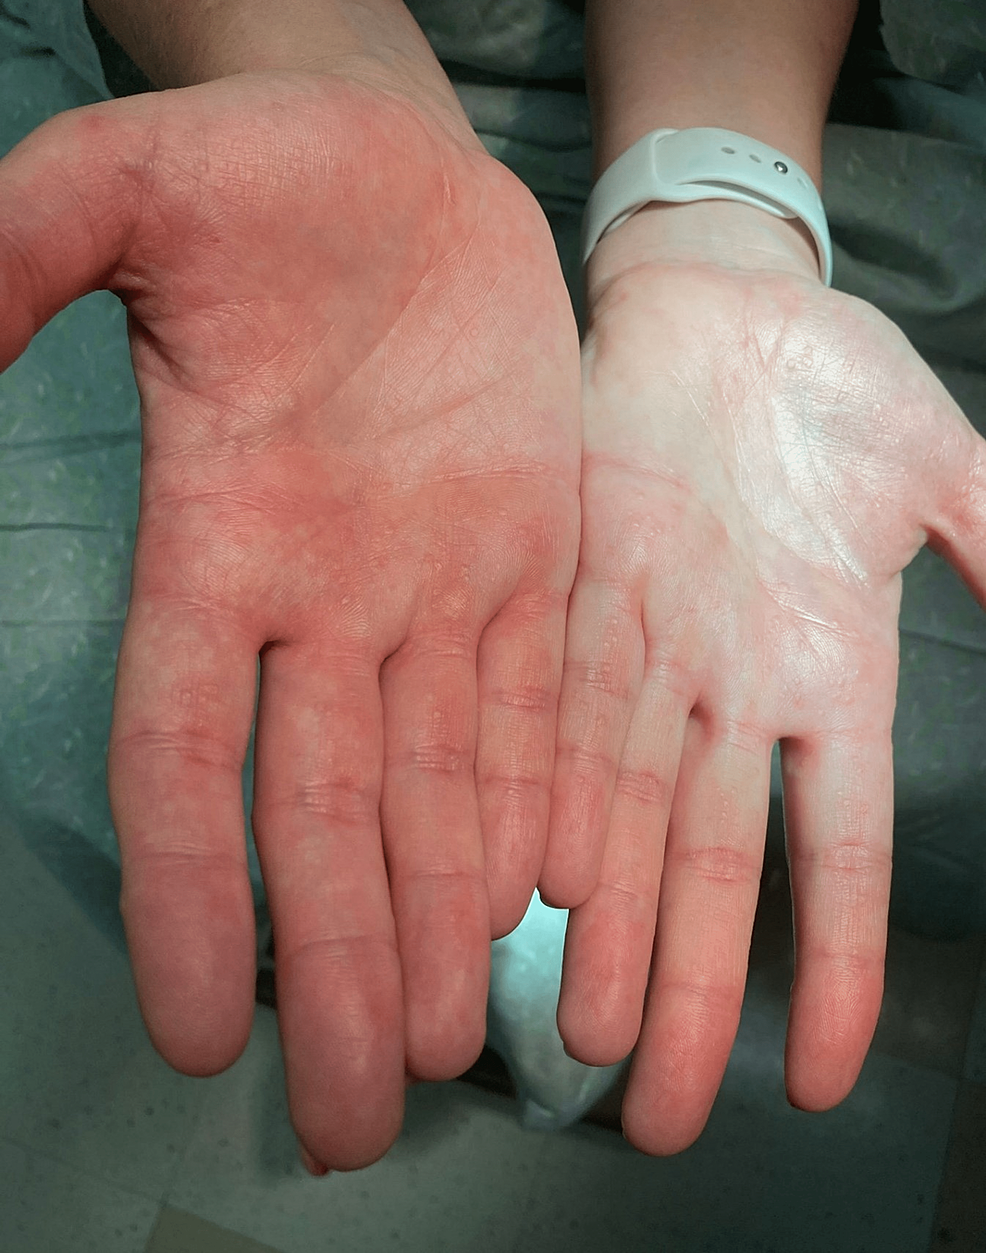 palm-surface-of-the-patient-display-multiple-dots-hyperkeratosis-papules-on-the-palm-and-fingers